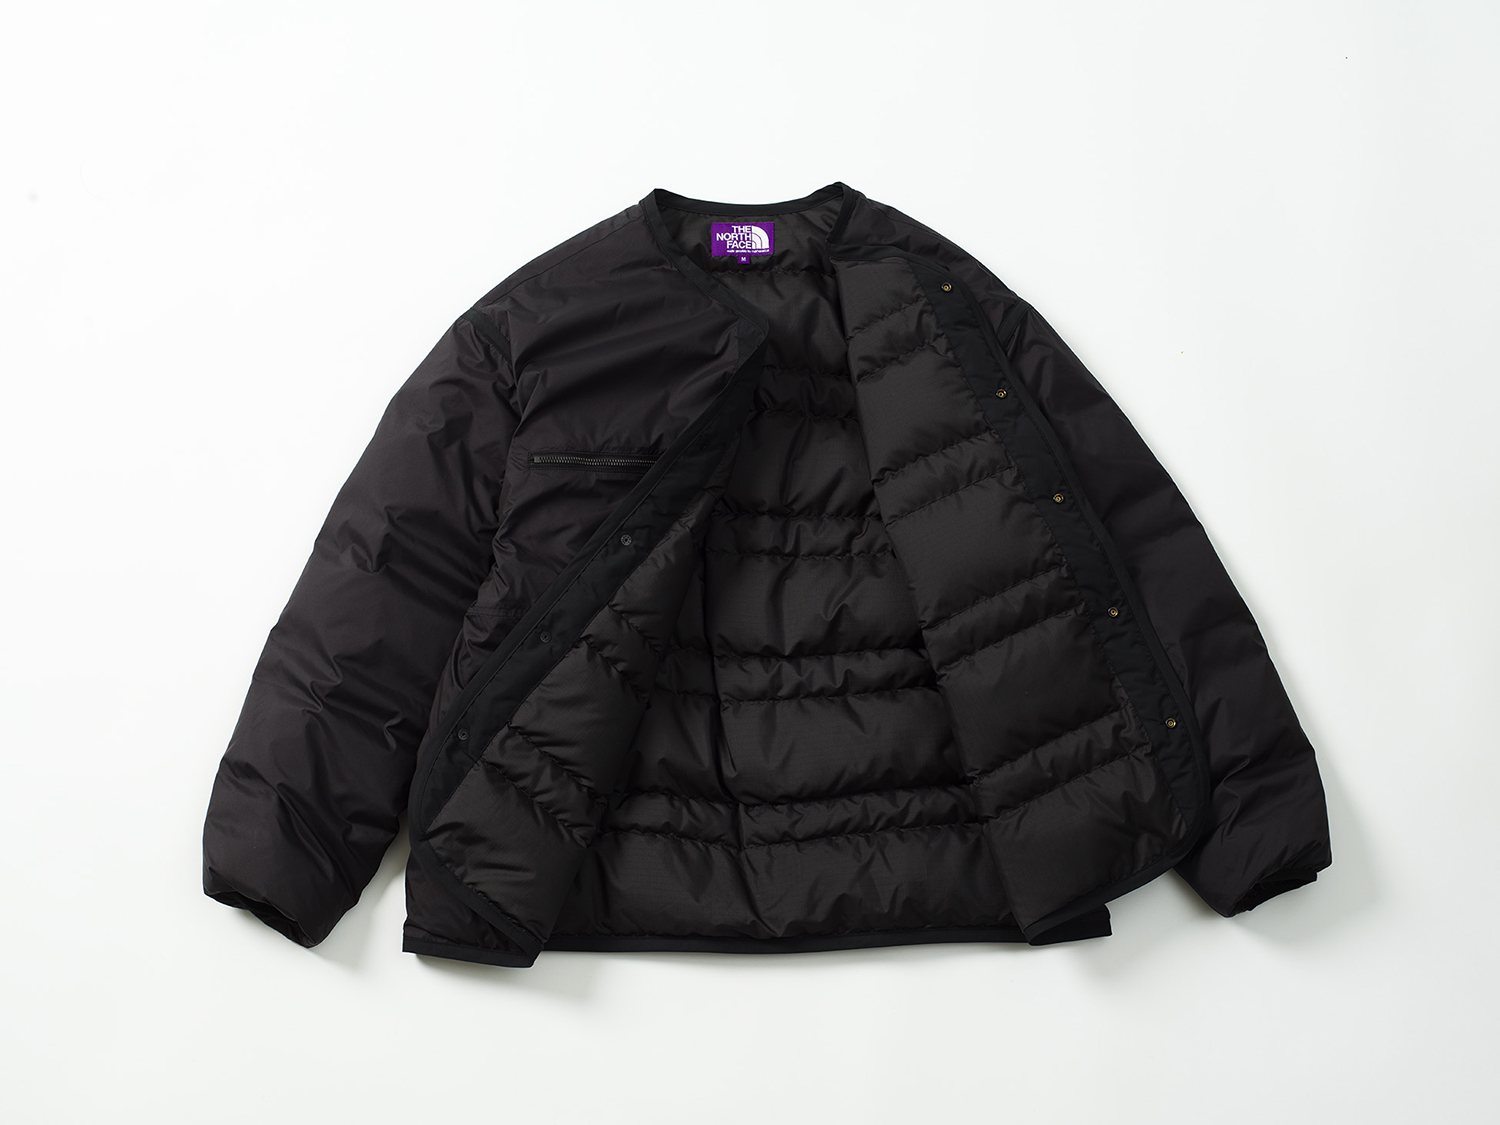 THE NORTH FACE PURPLE LABEL for RHC Ron Hermanの新作は ...